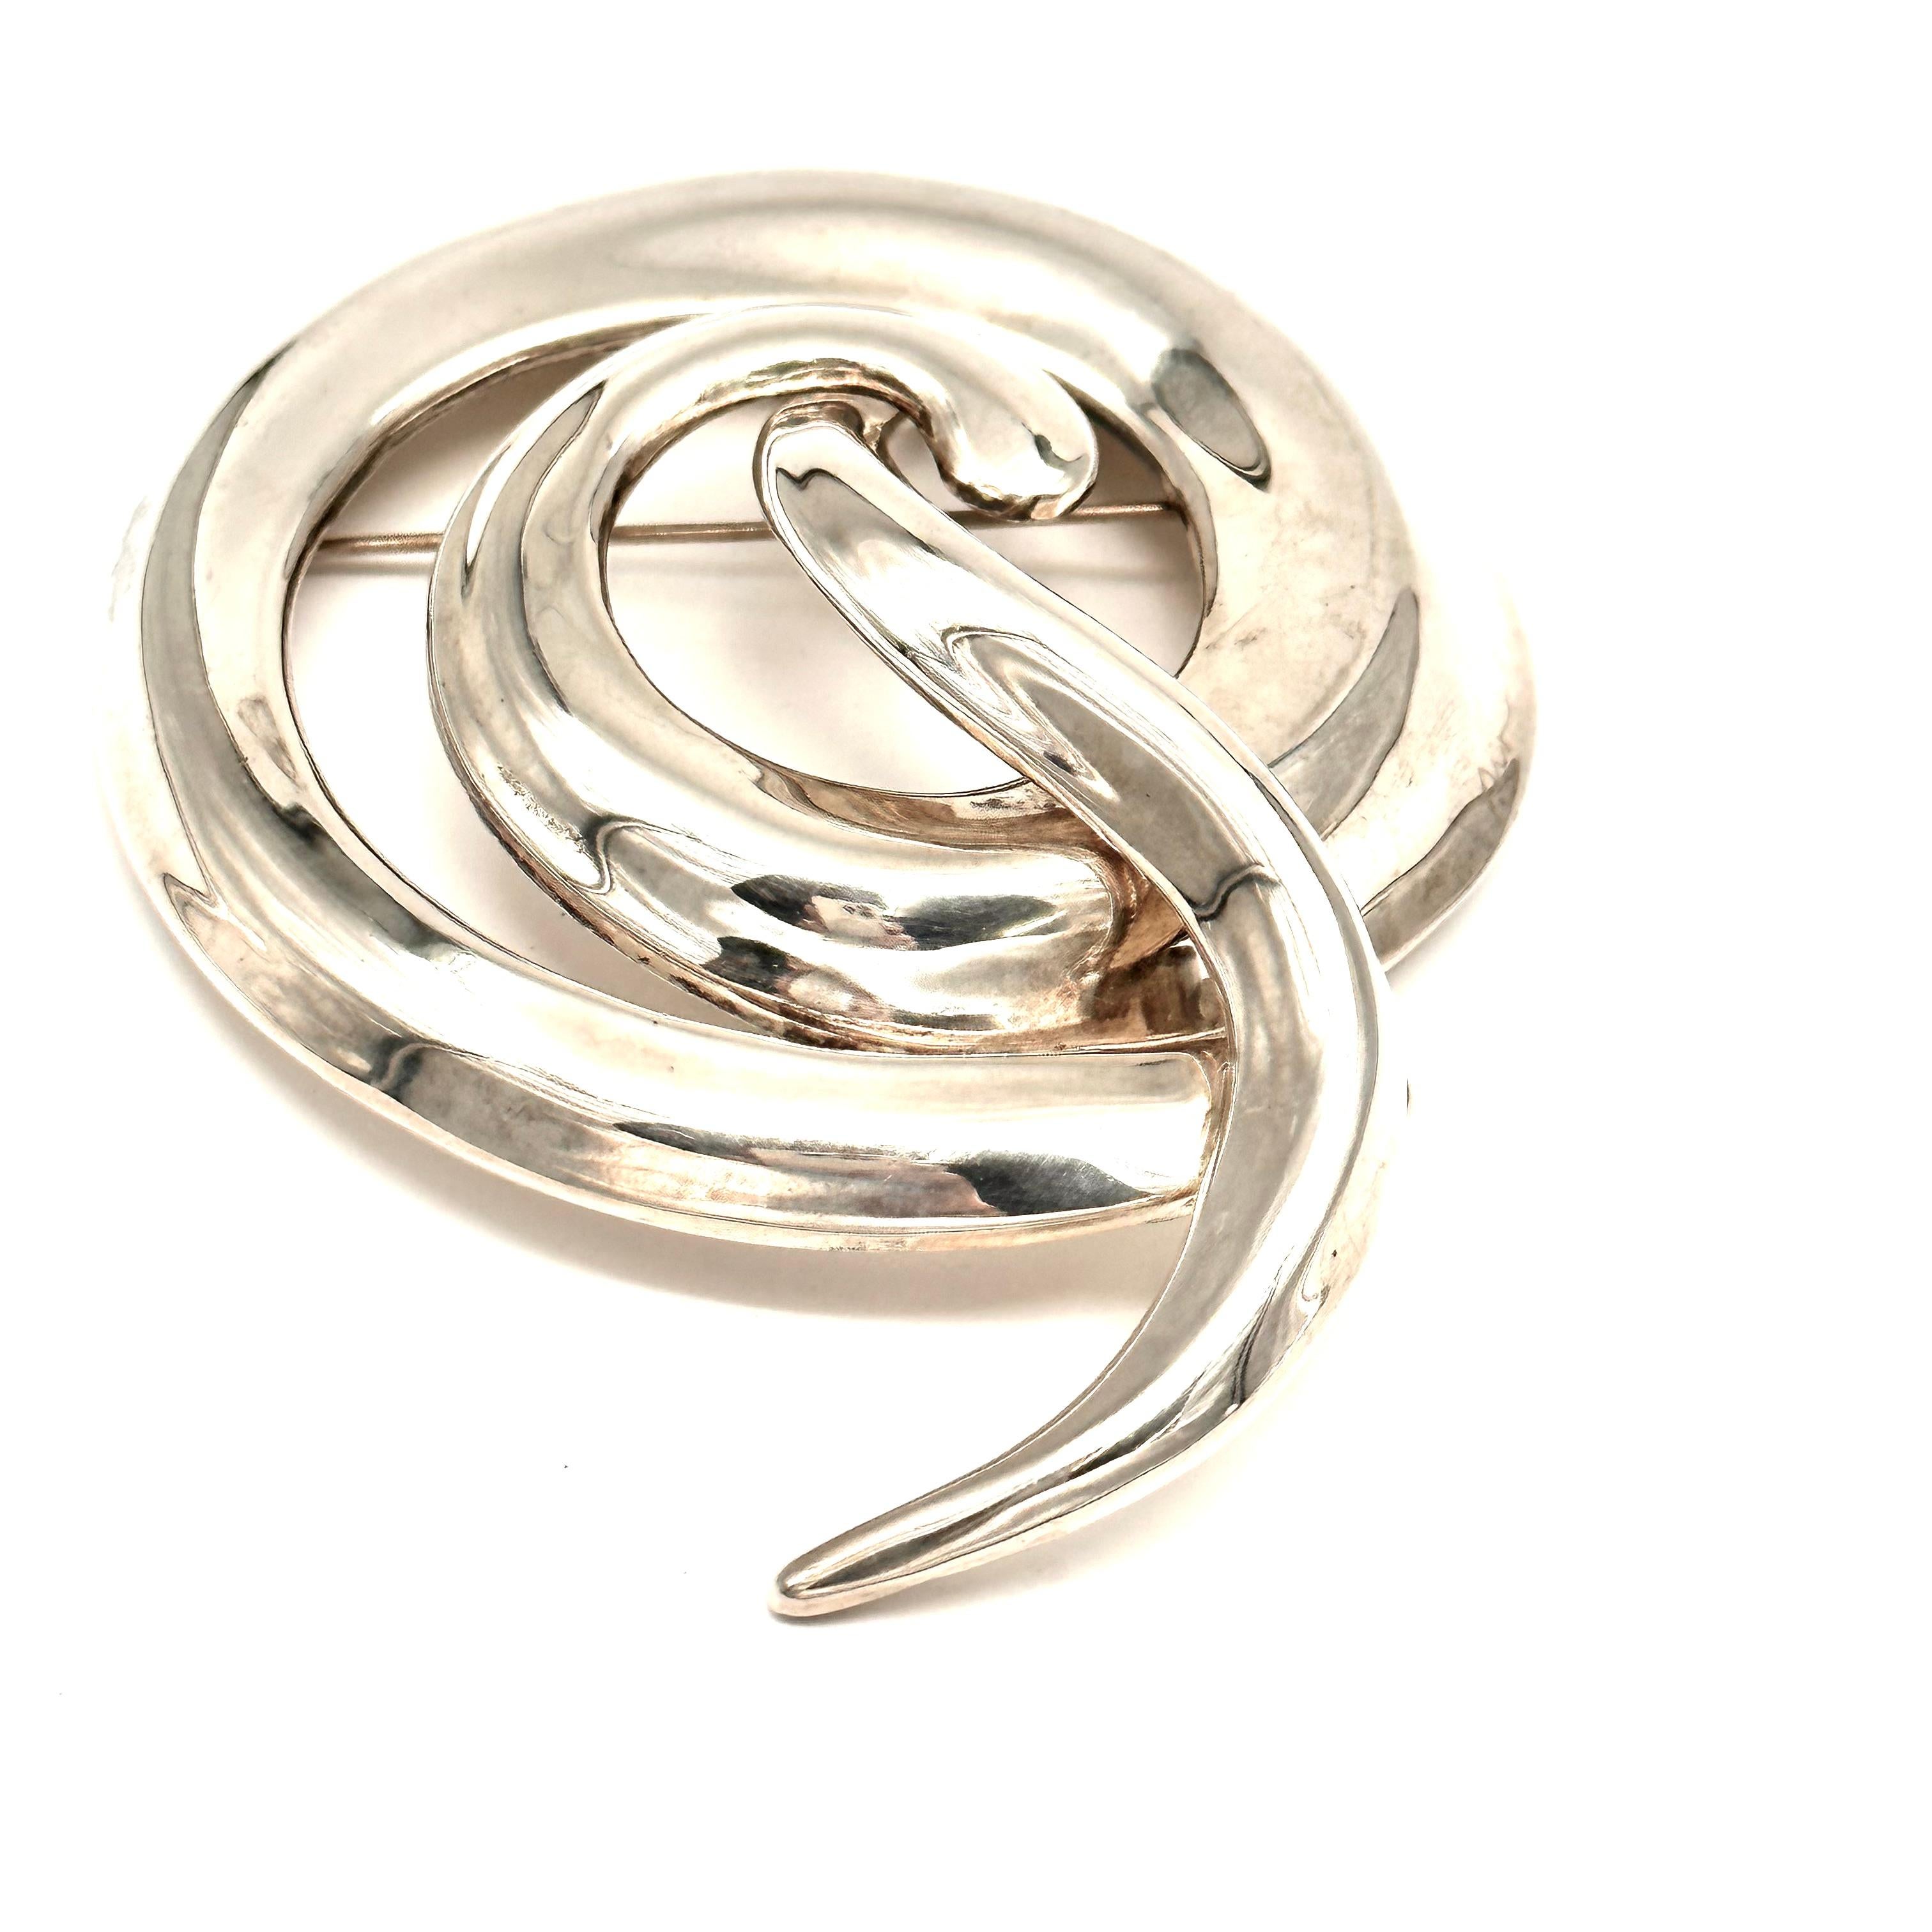 Created for a Donna Karan fall collection 1987, this large and impressive brooch is iconic for Robert Lee Morris and for Donna Karan, due to the unmistakable organic flow of the design. the spiral is intercepted by another curving worm like form,